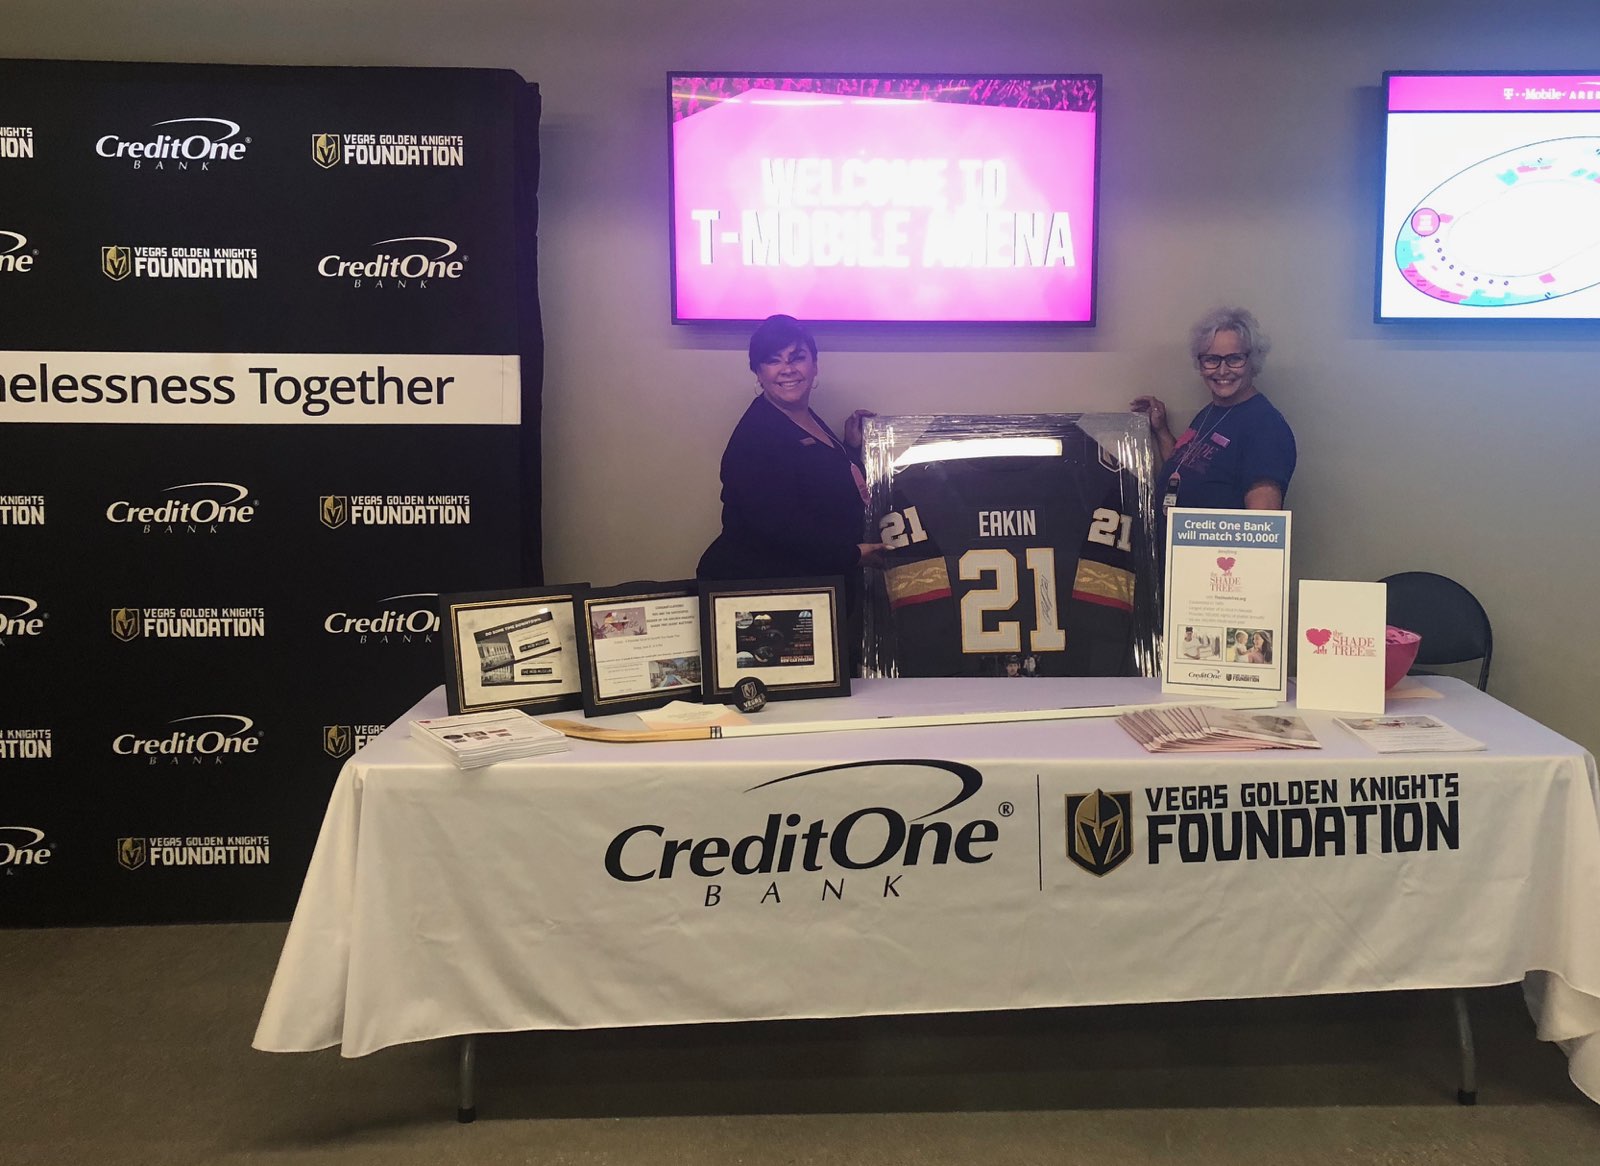 Credit One Bank Silent Auction to Raise Money for Non-Profits